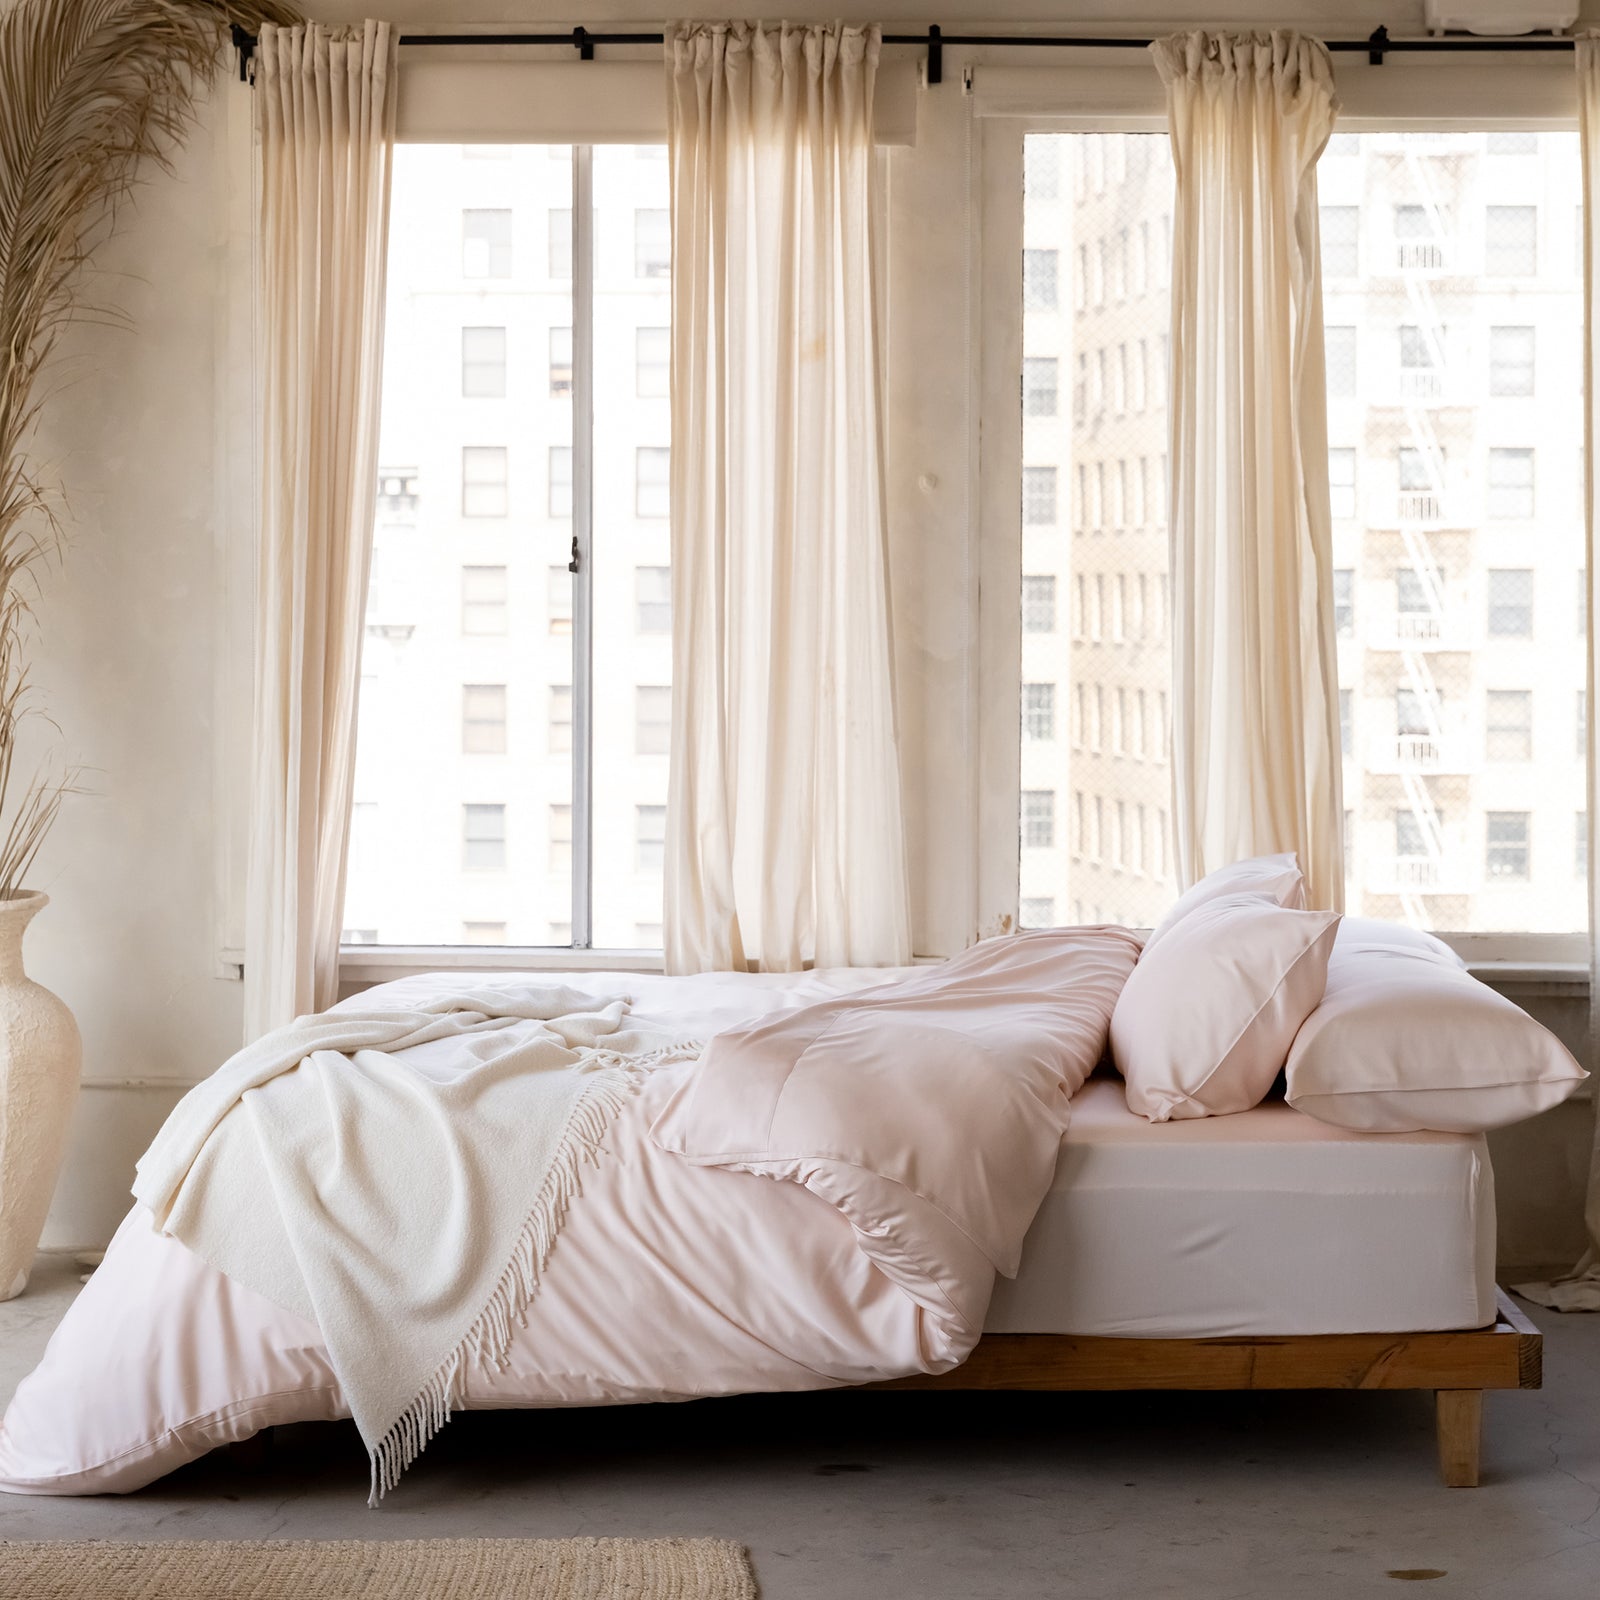 Bed under windows with peony bedding 